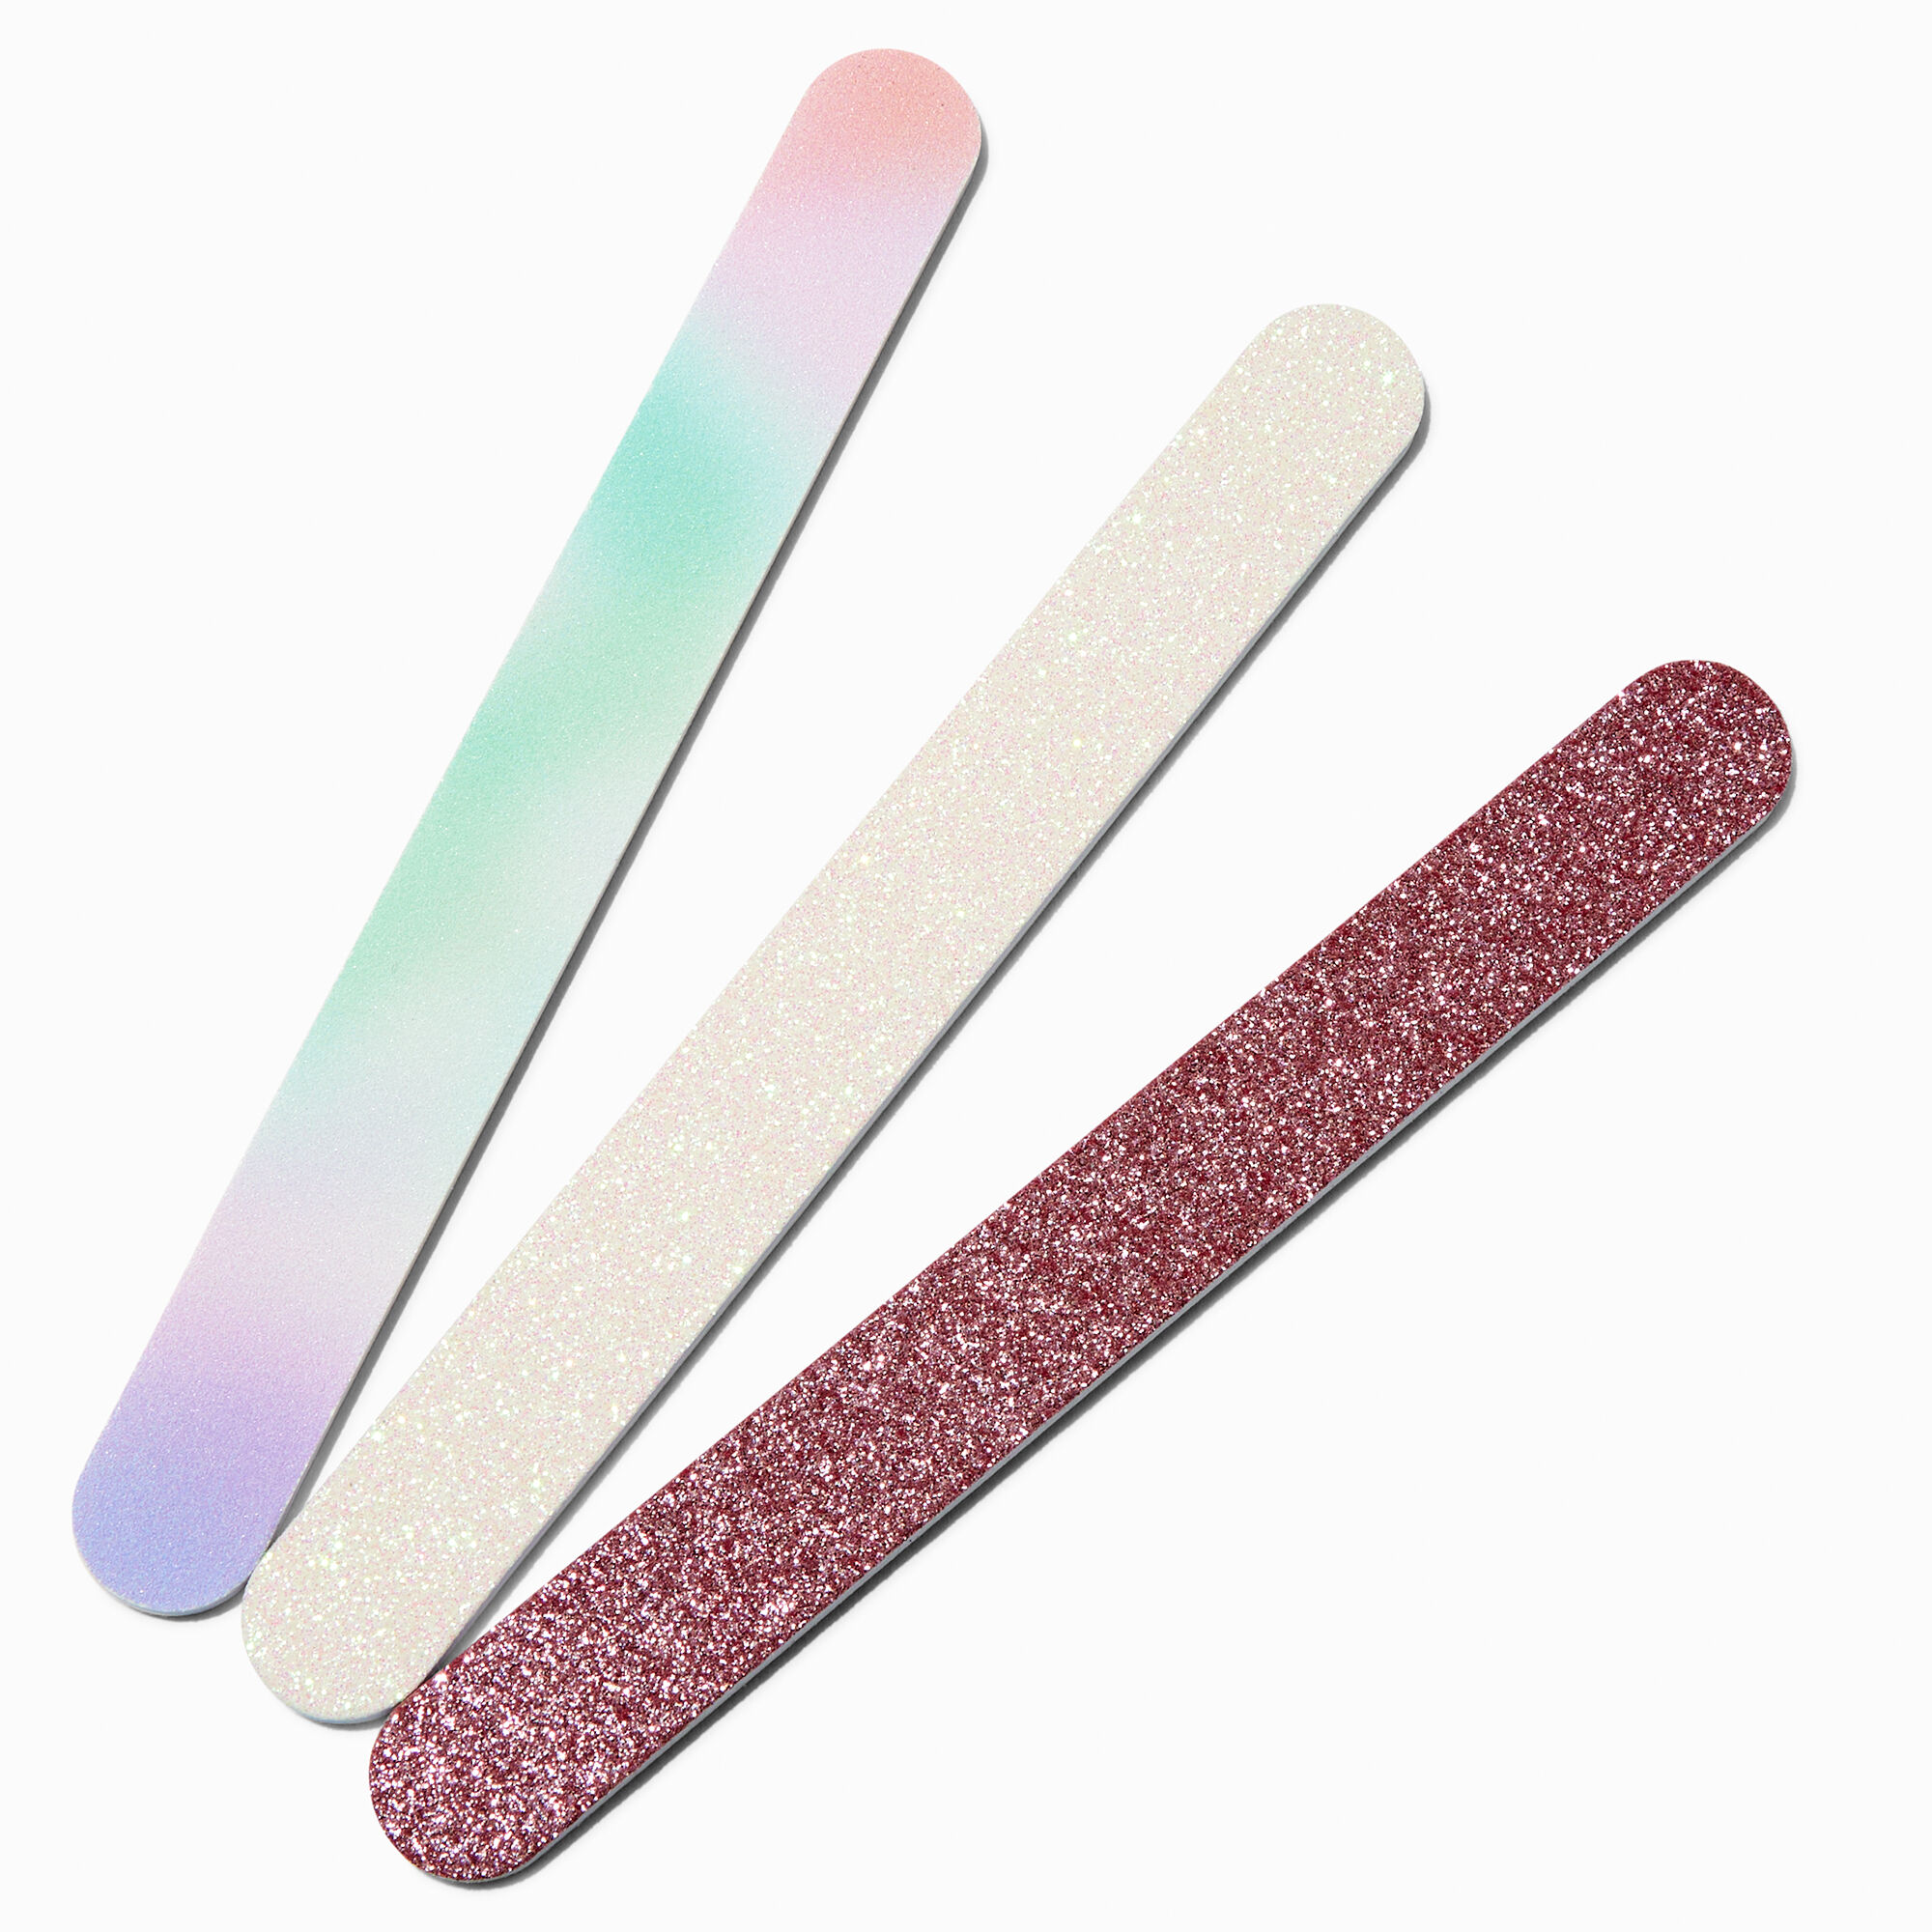 View Claires Holographic Nail File Set 3 Pack information